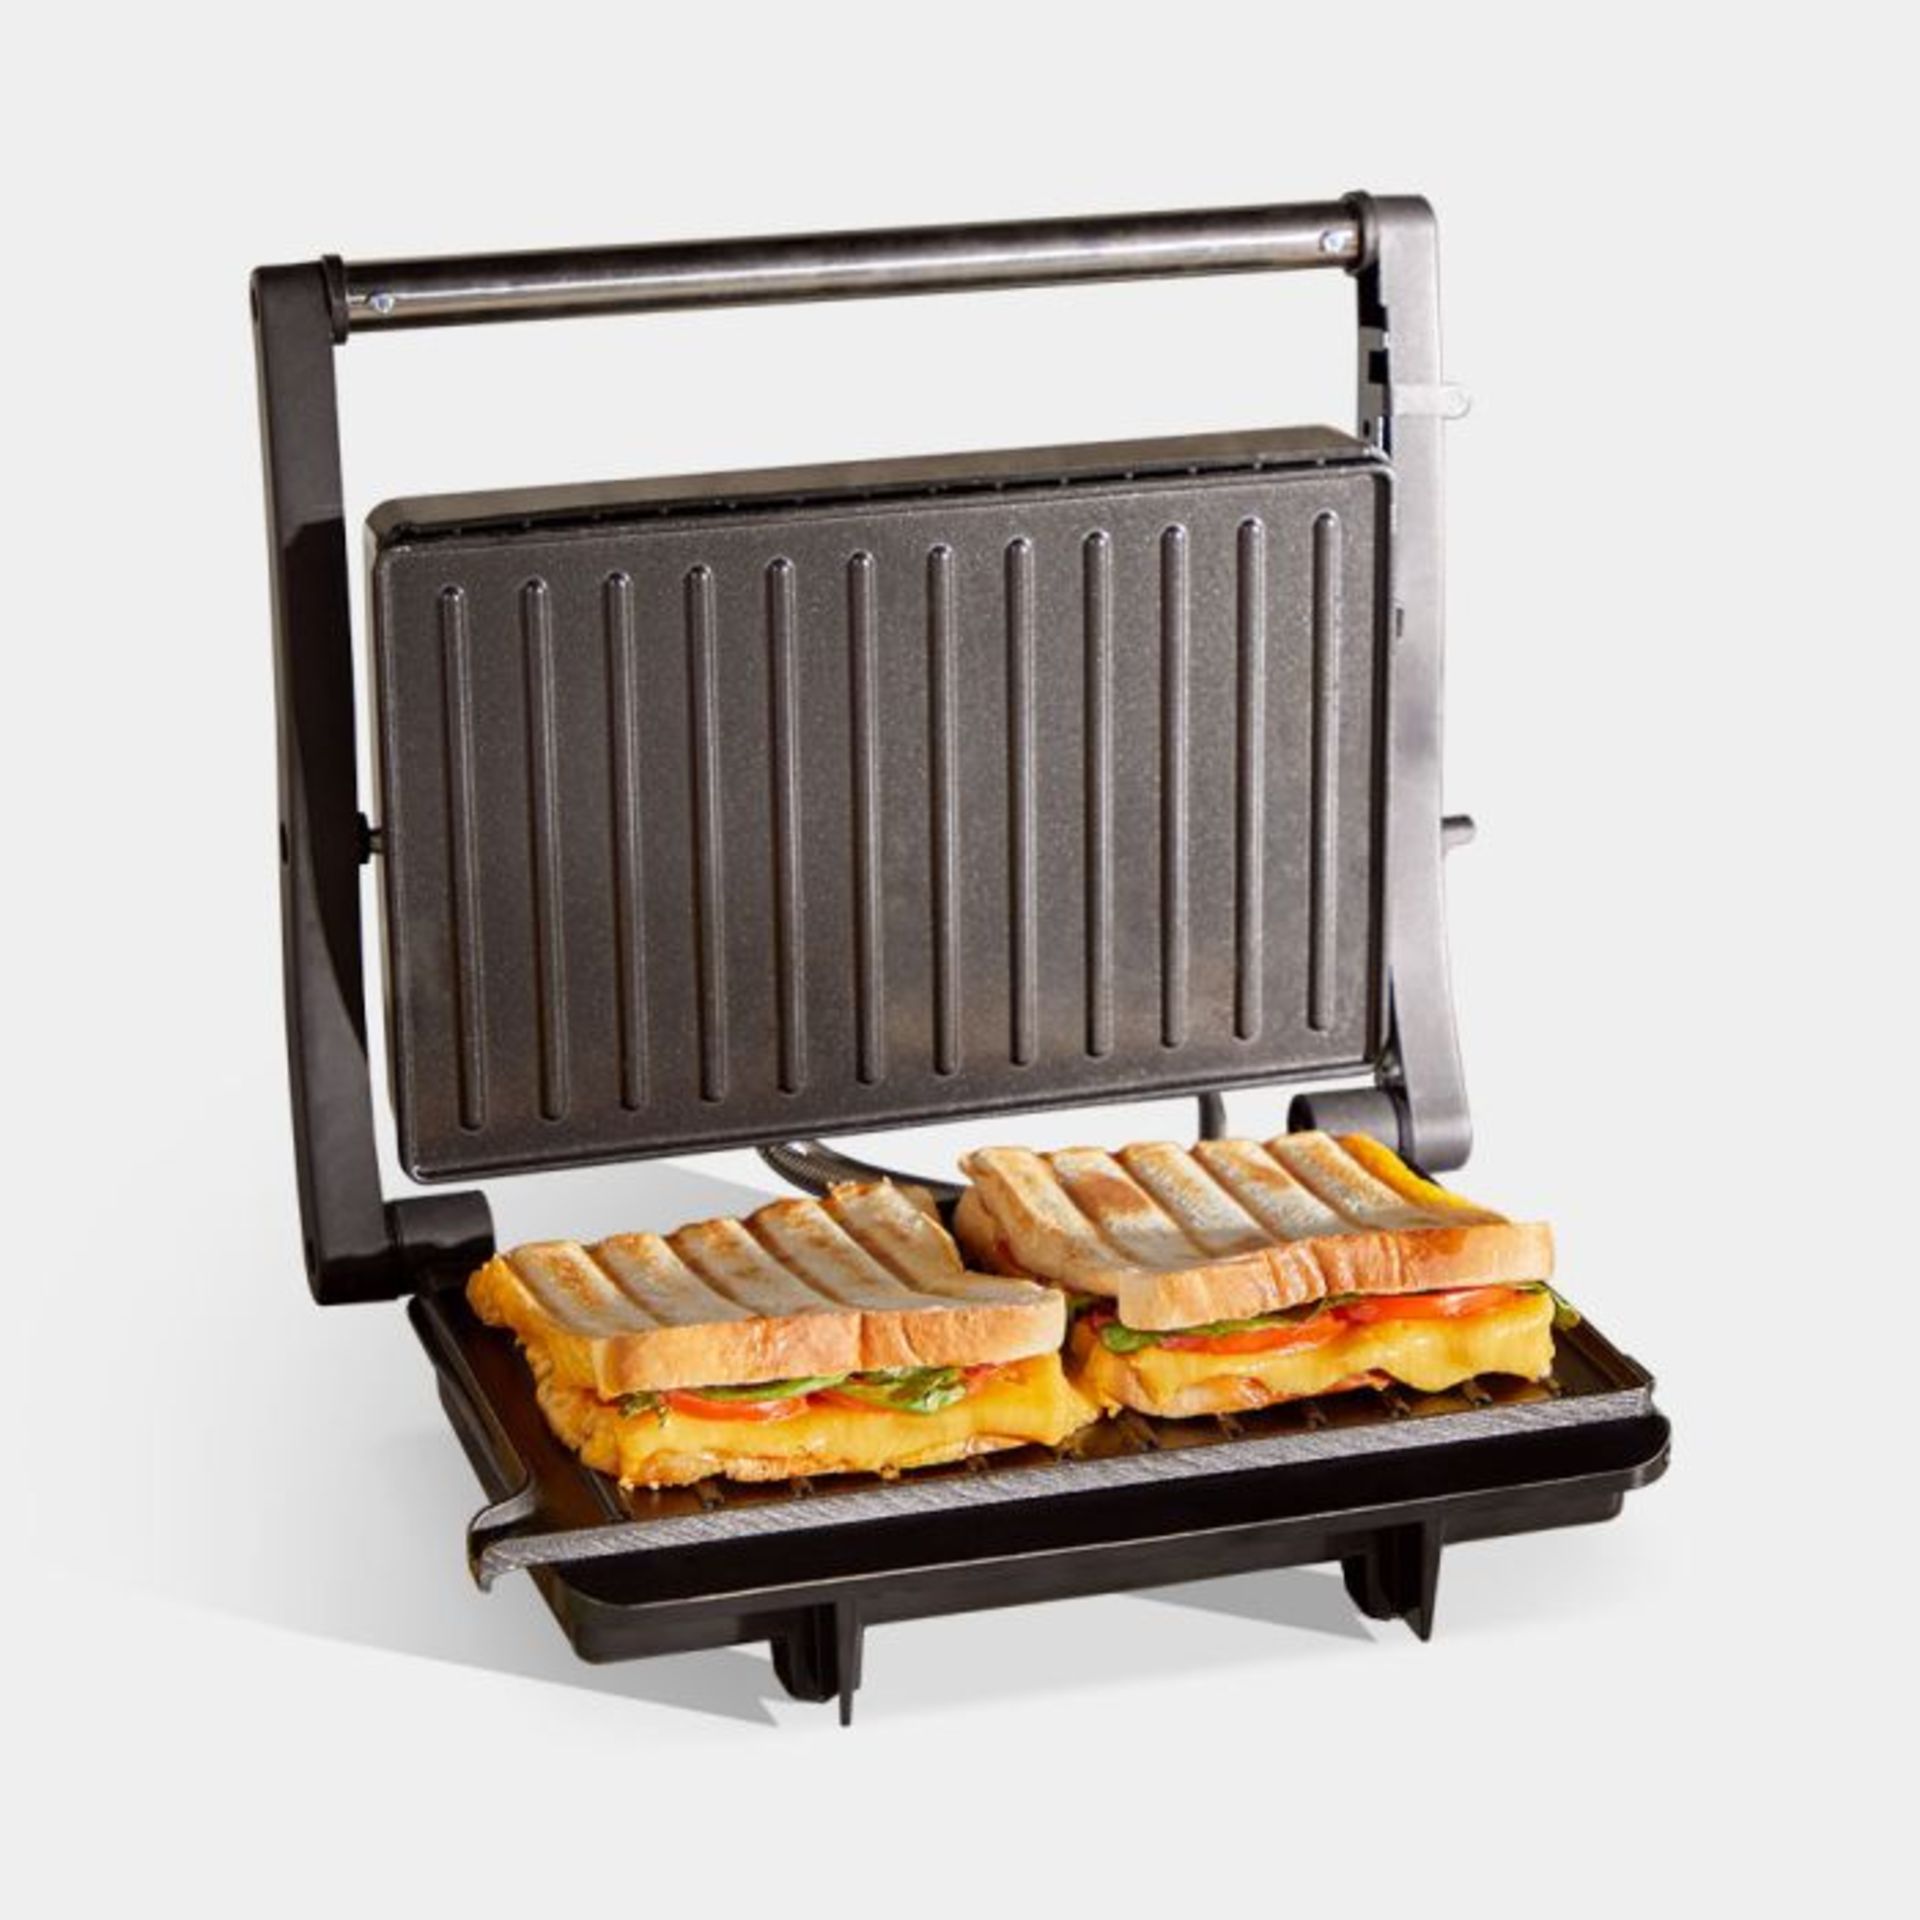 2 Slice Grill. - BW. A floating hinge system can adjust to many different food sizes, opening up